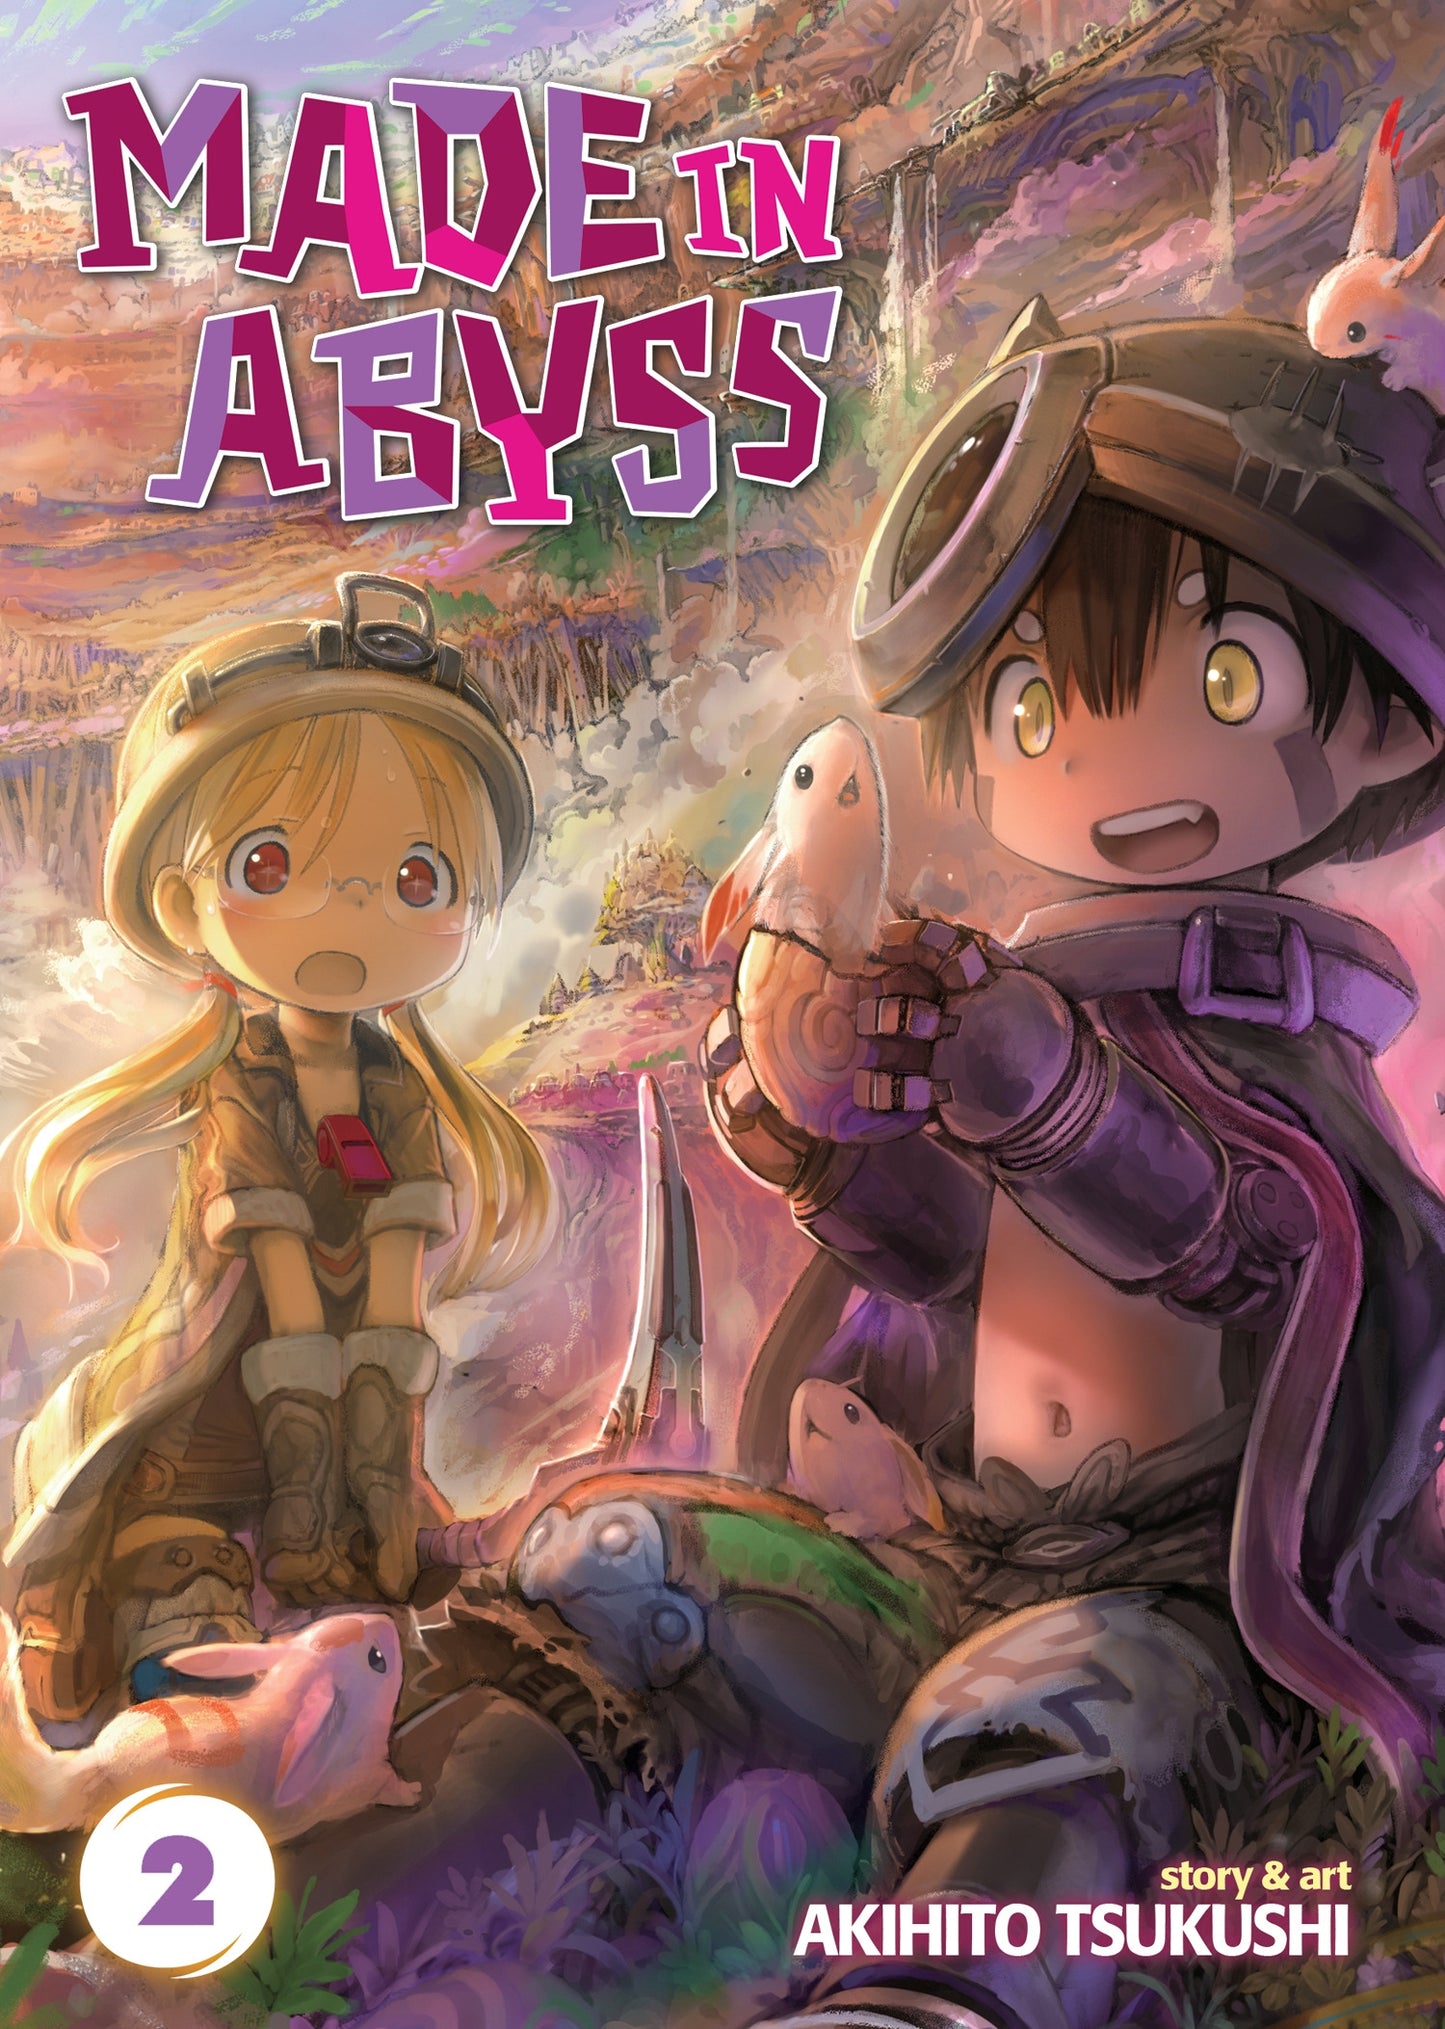 Made in Abyss Vol. 2 - Manga Warehouse